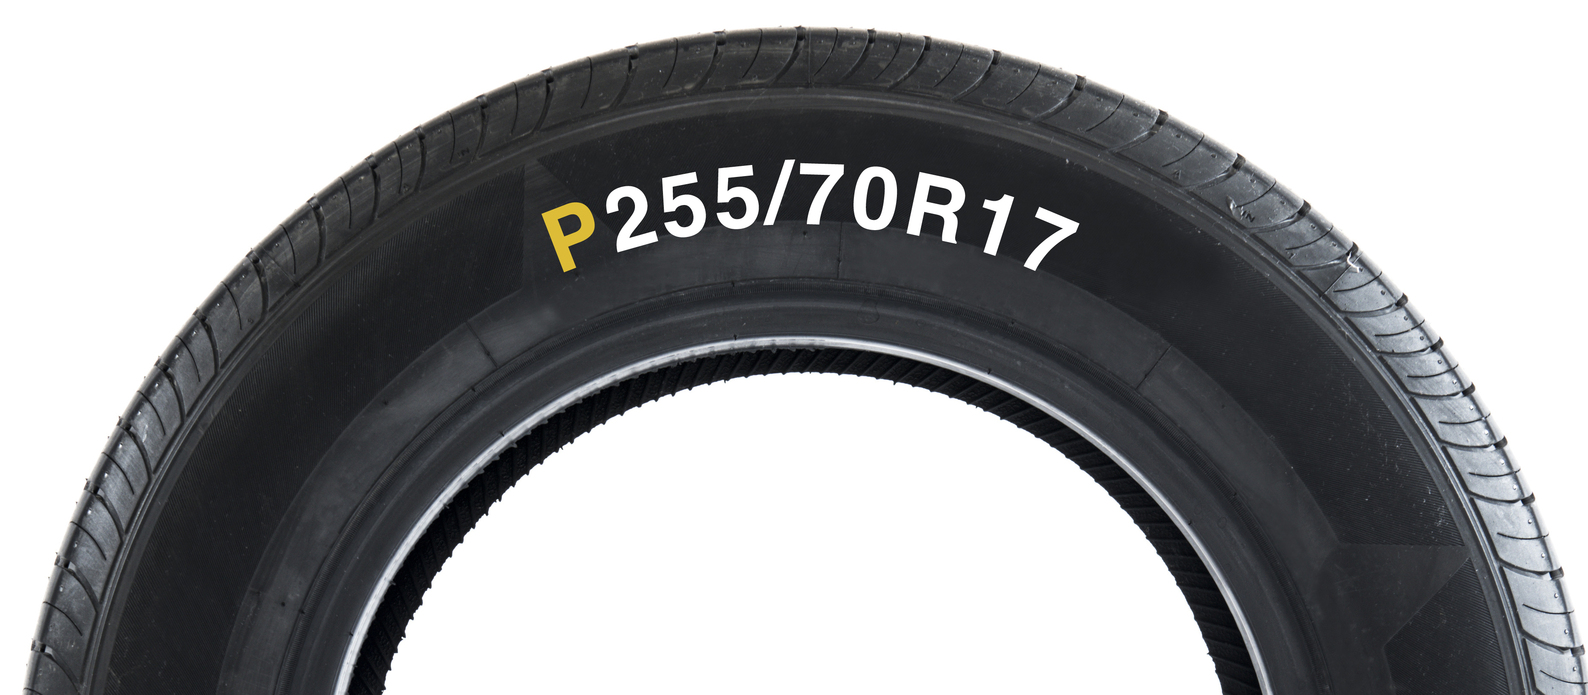 Sidewall of a tire with tire size showing.